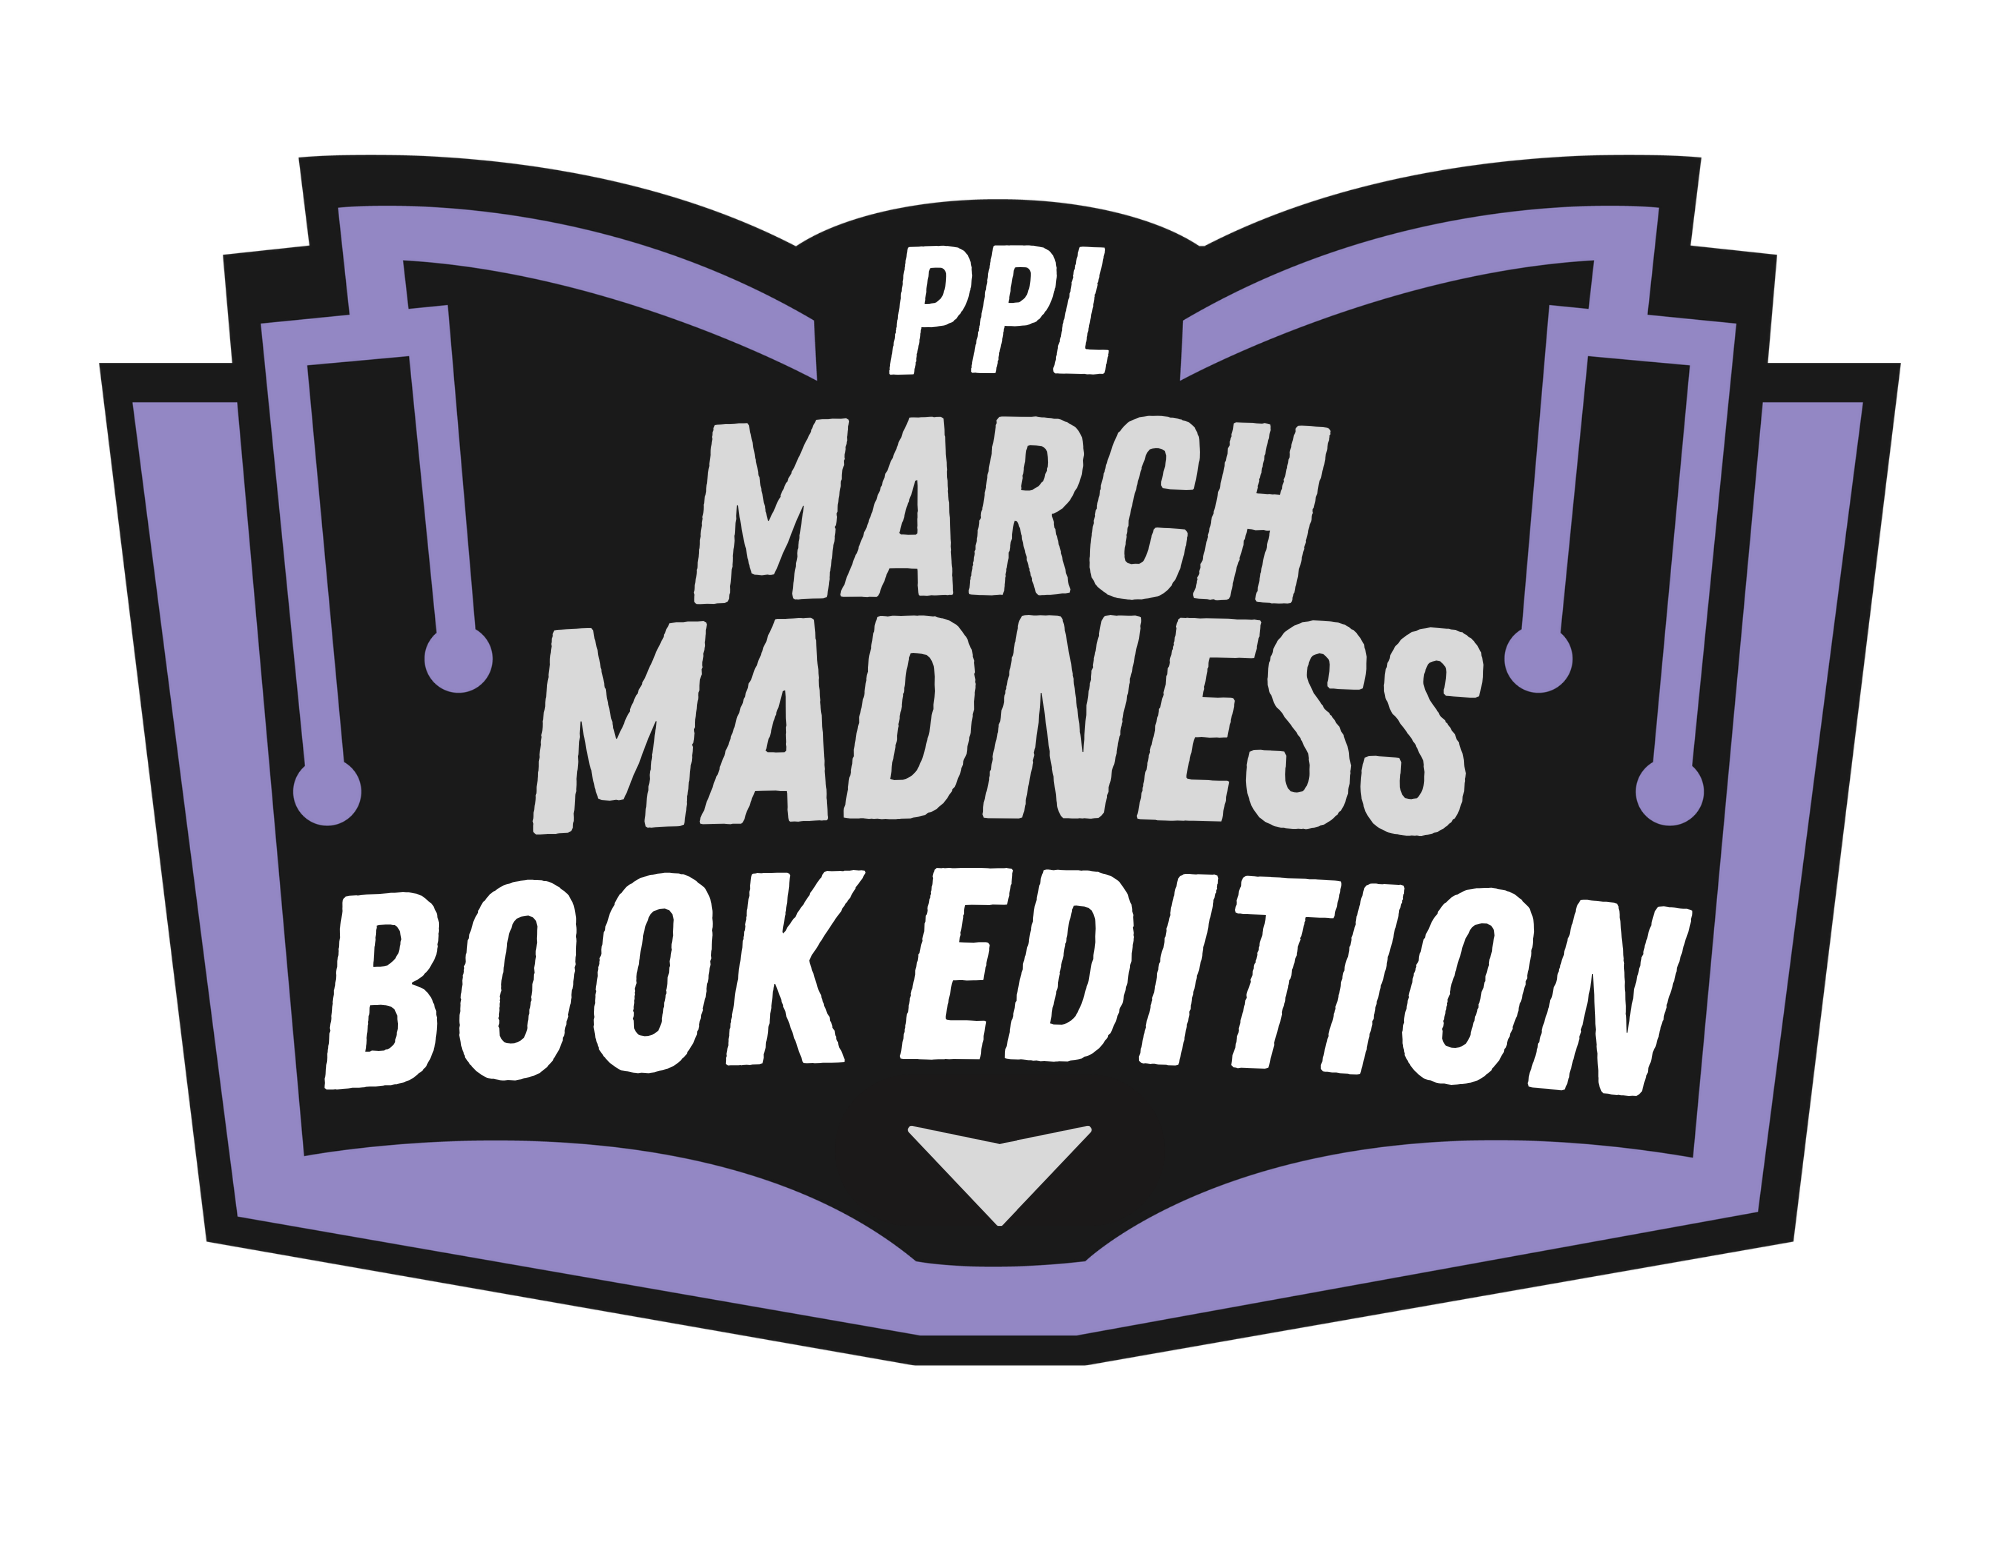 "PPL March Madness Book Edition"